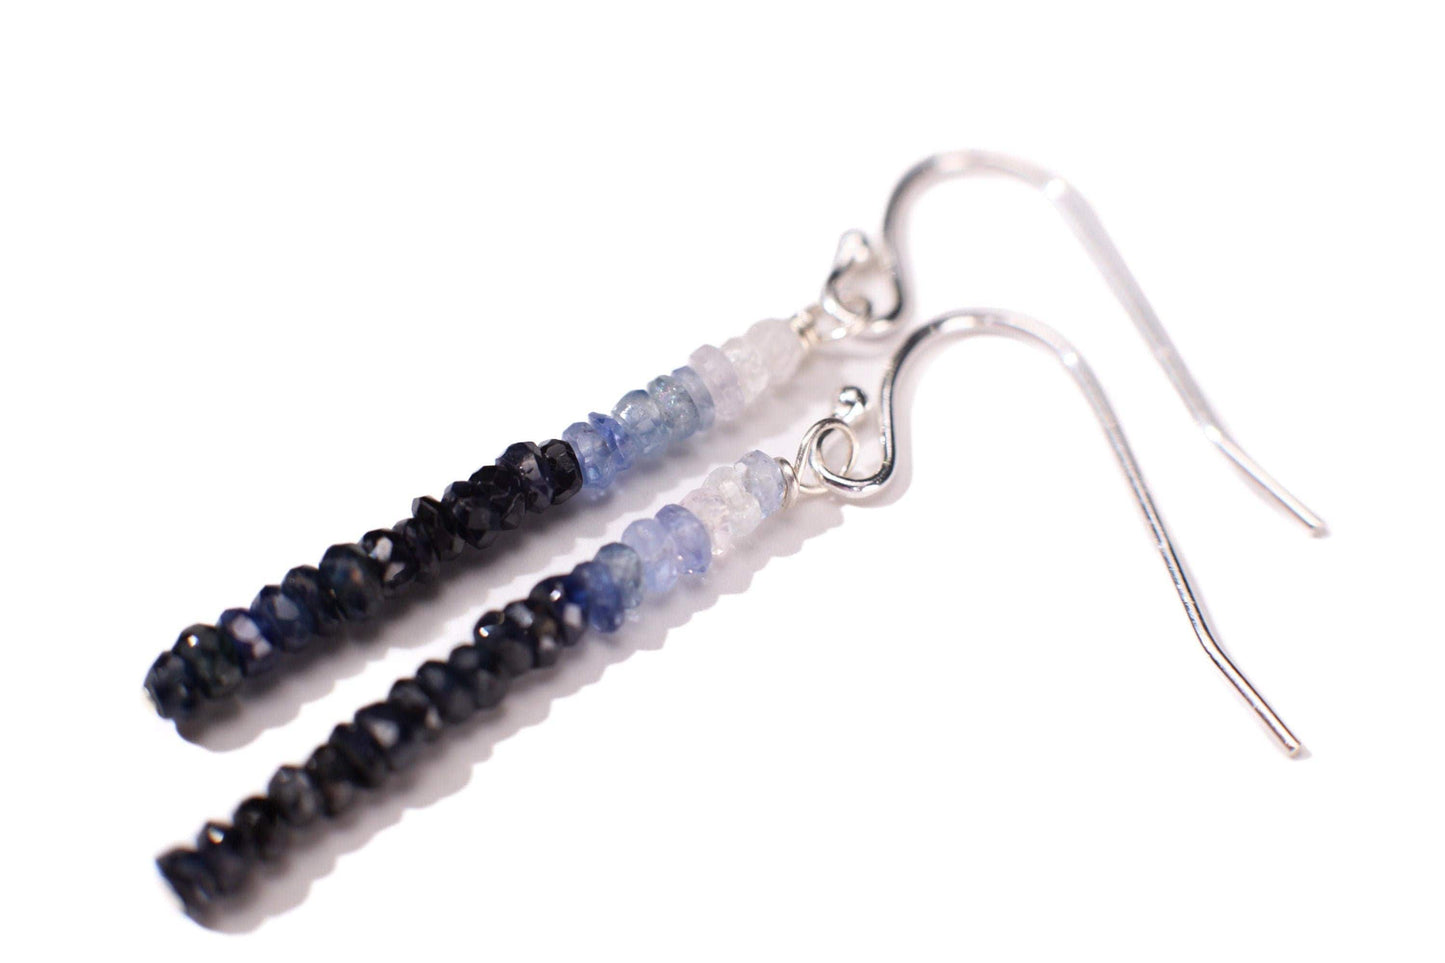 Ombre Sapphire Faceted 3mm Roundel Bar Earrings 14K Gold Filled and 925 Sterling Silver Hook Ear Wire or Lever back Earrings, Elegant Gift